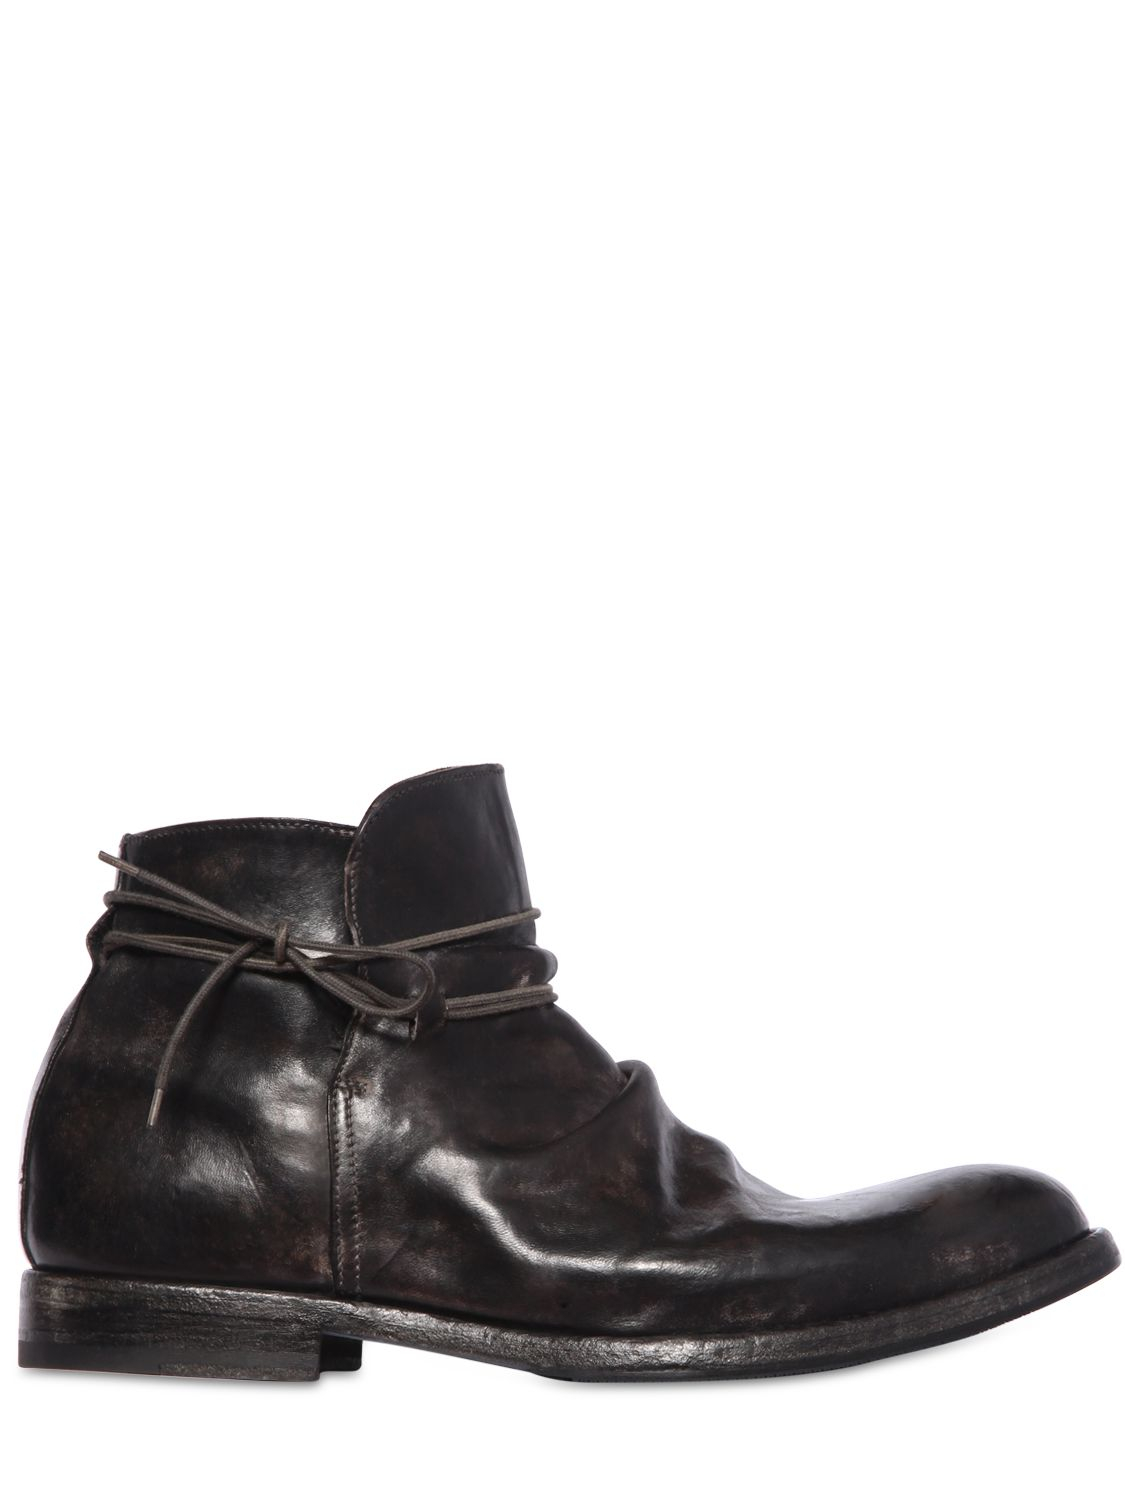 Shoto Wrinkled Leather Ankle Boots in Black for Men - Lyst